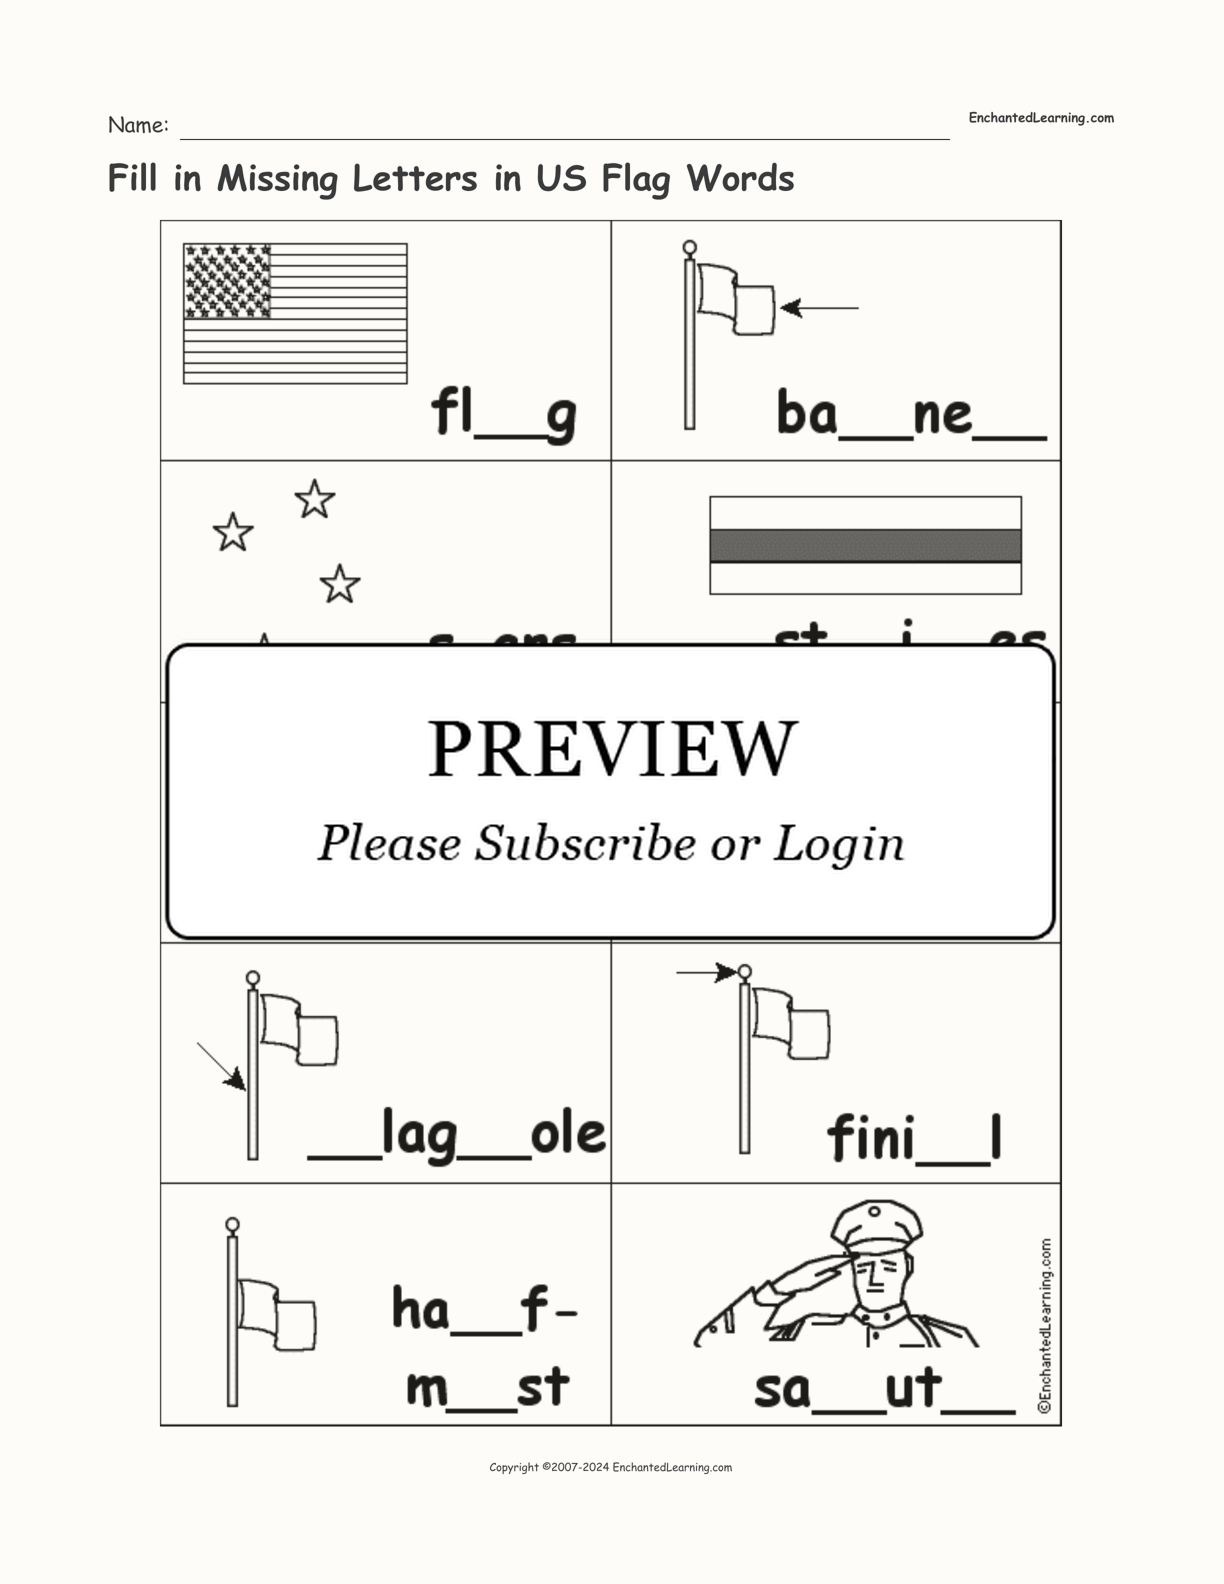 Fill in Missing Letters in US Flag Words interactive worksheet page 1